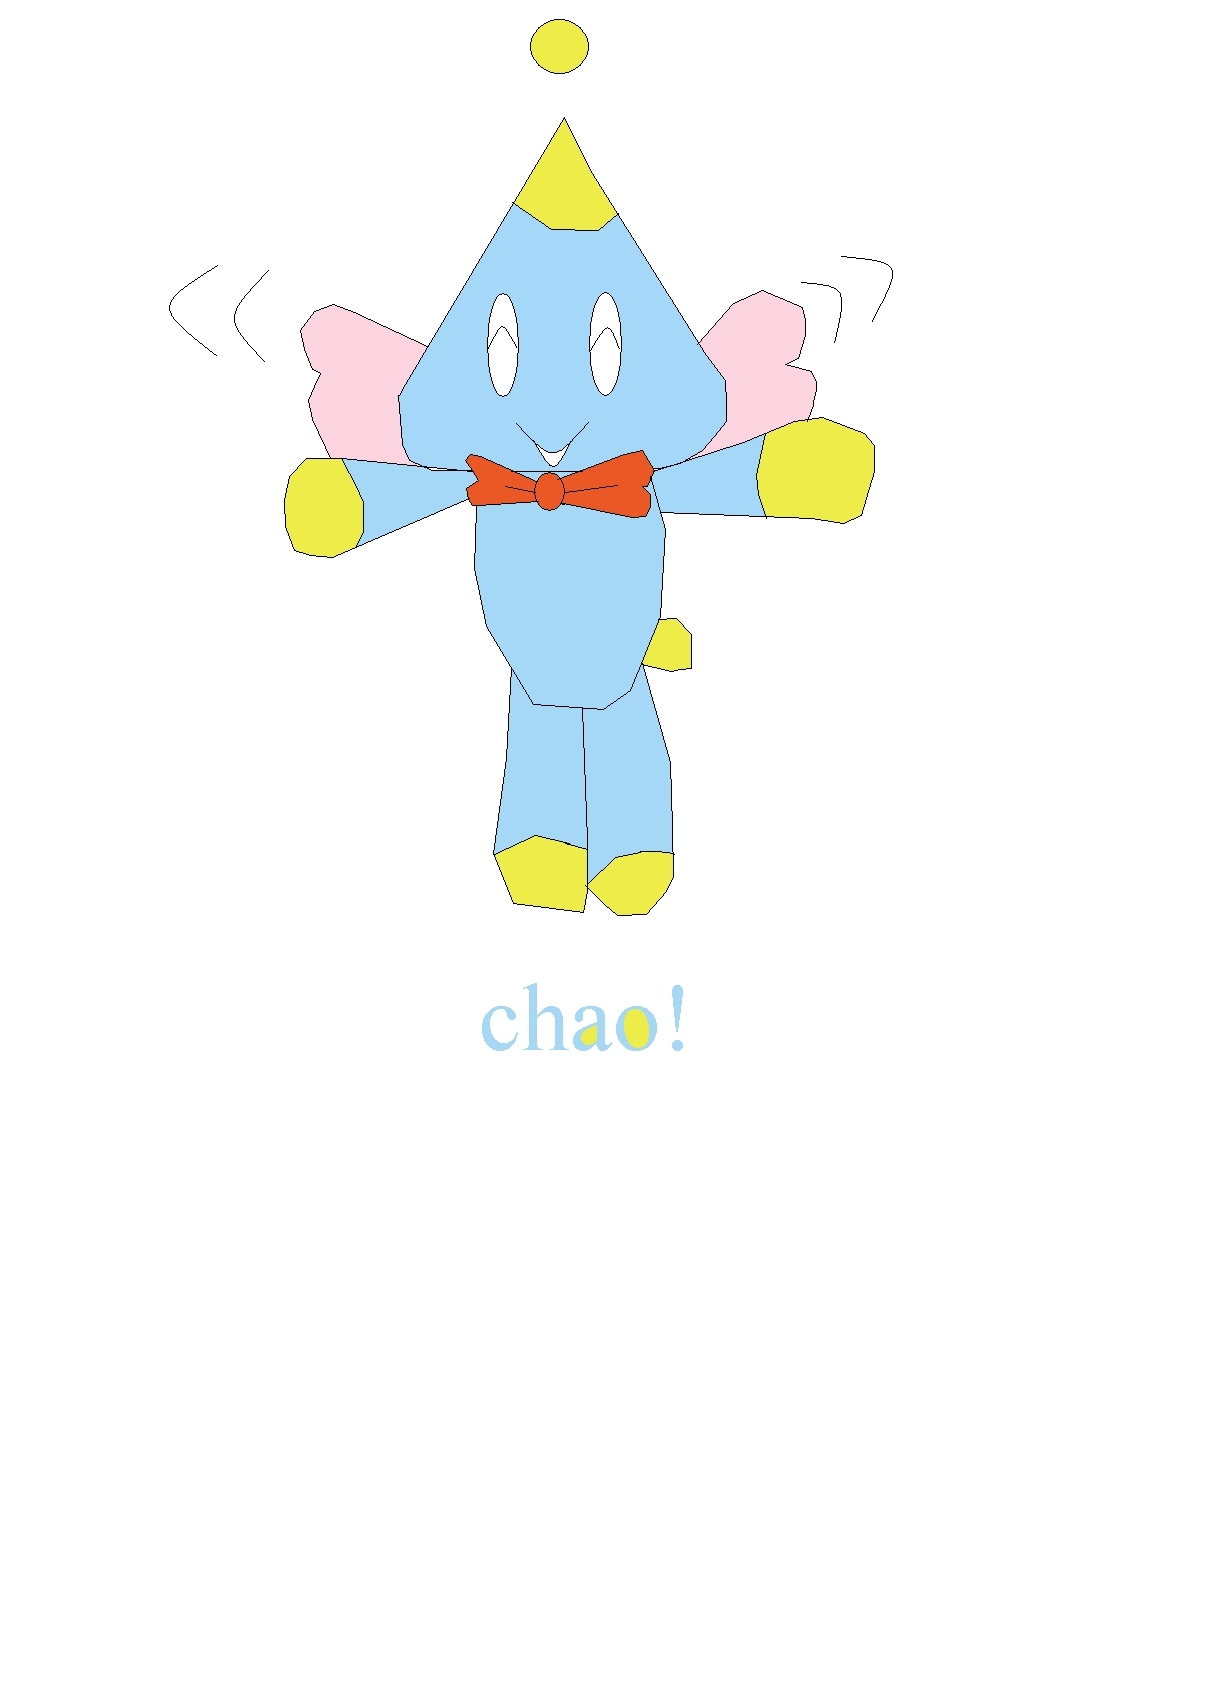 cheese screaming "chao!" Cheese the chao Fan Art